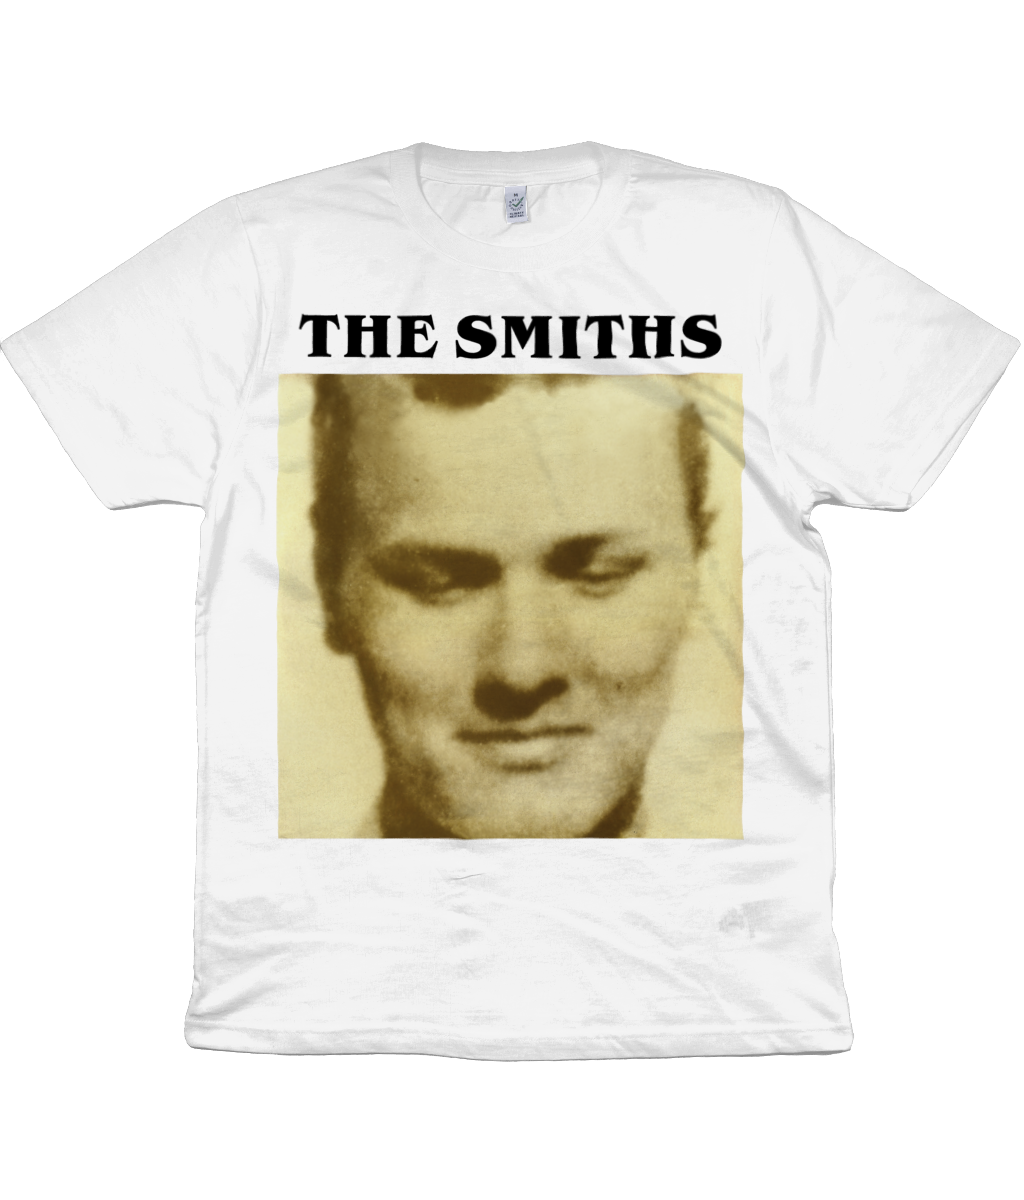 THE SMITHS - STRANGEWAYS, HERE WE COME - 1987 - Rough Trade Staff Promo